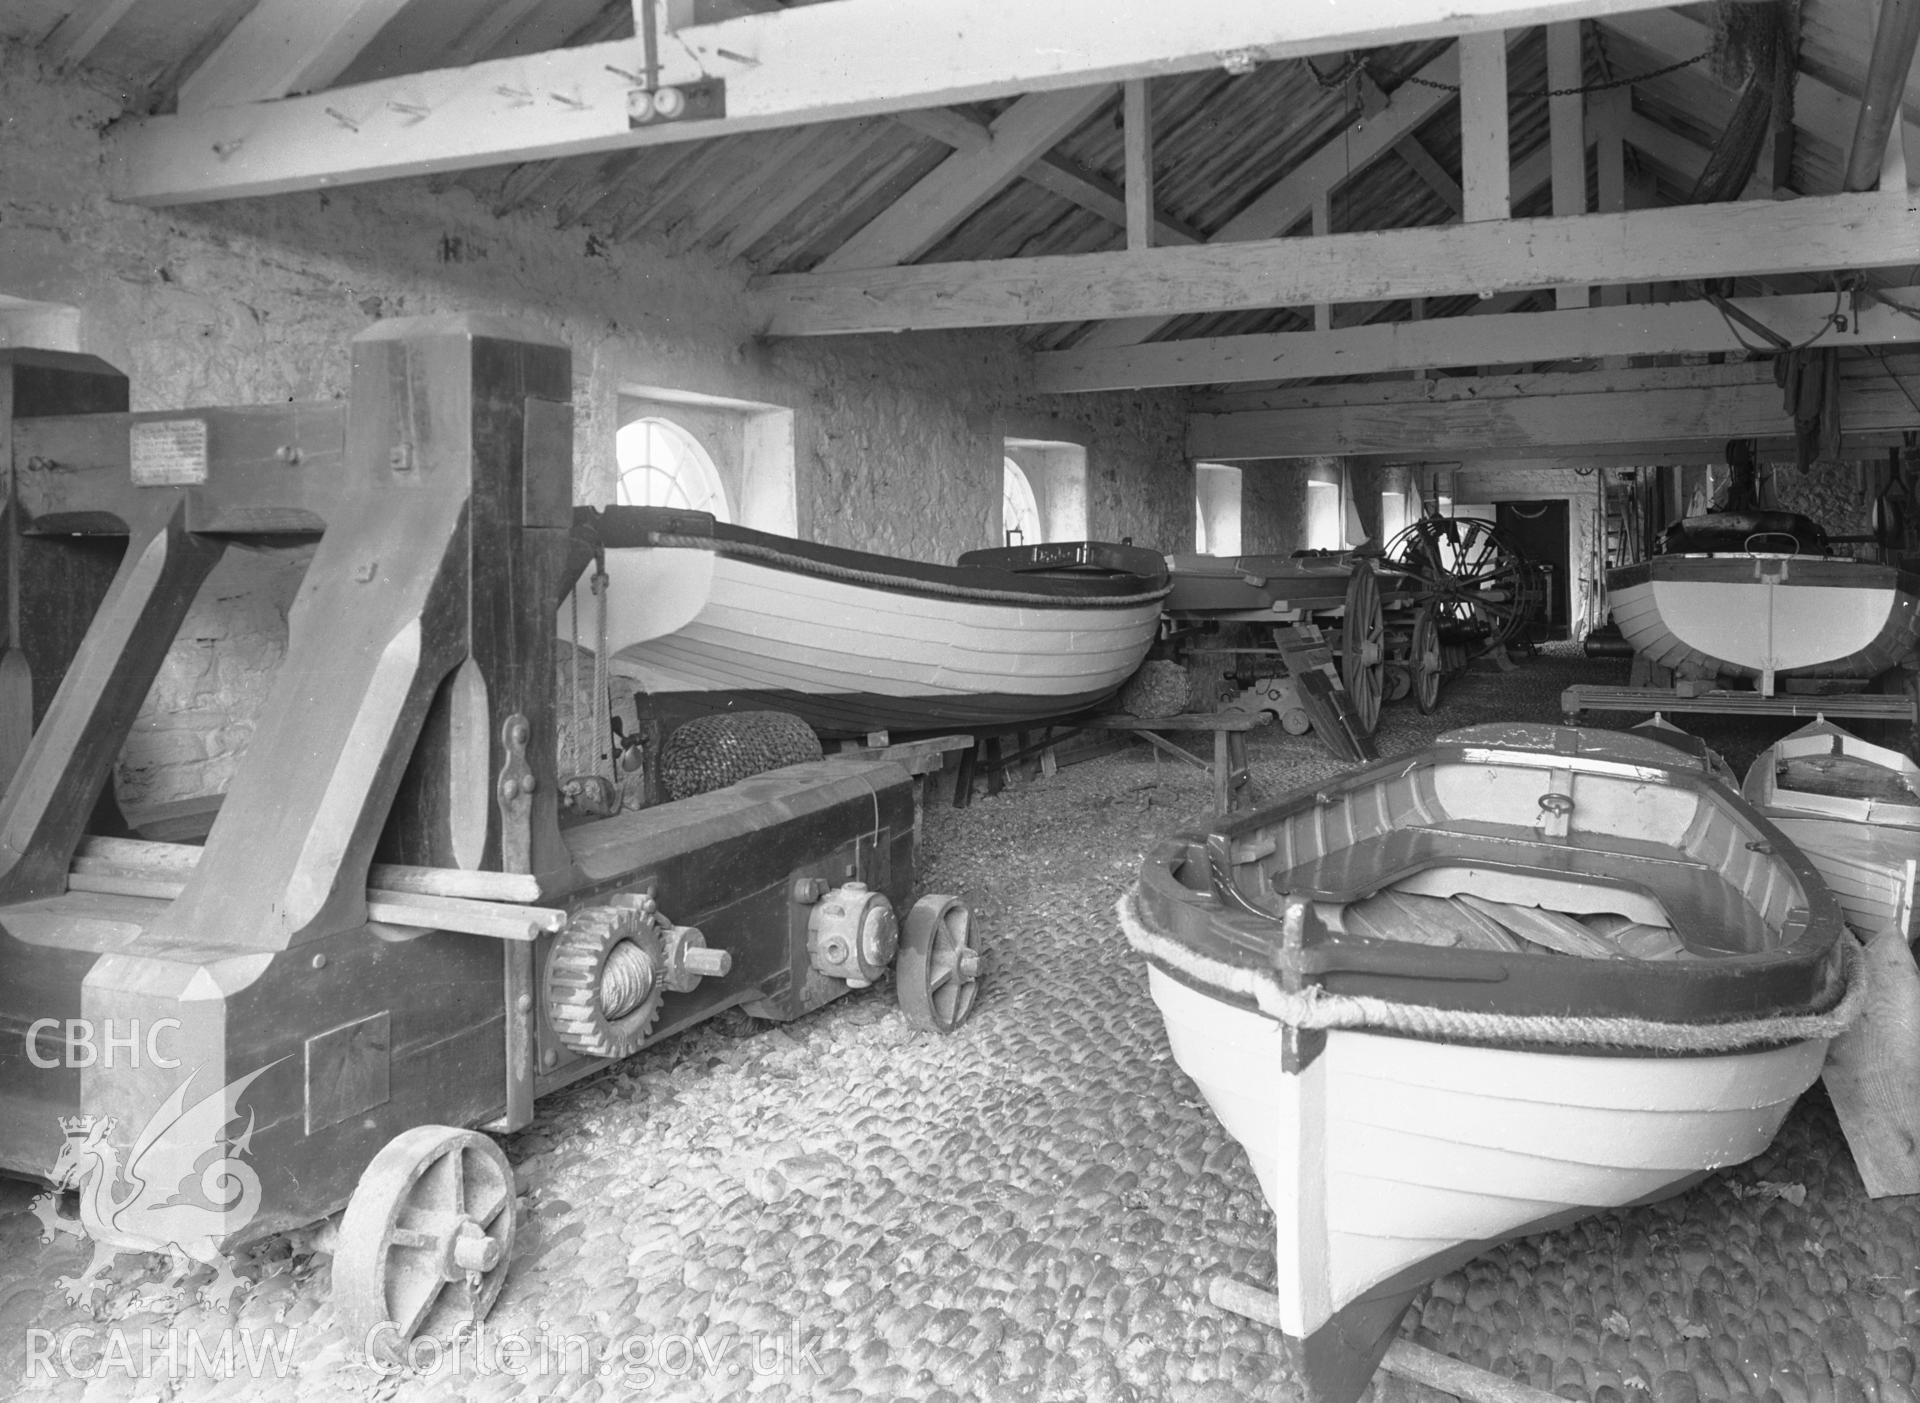 Interior view showing the maritime museum.